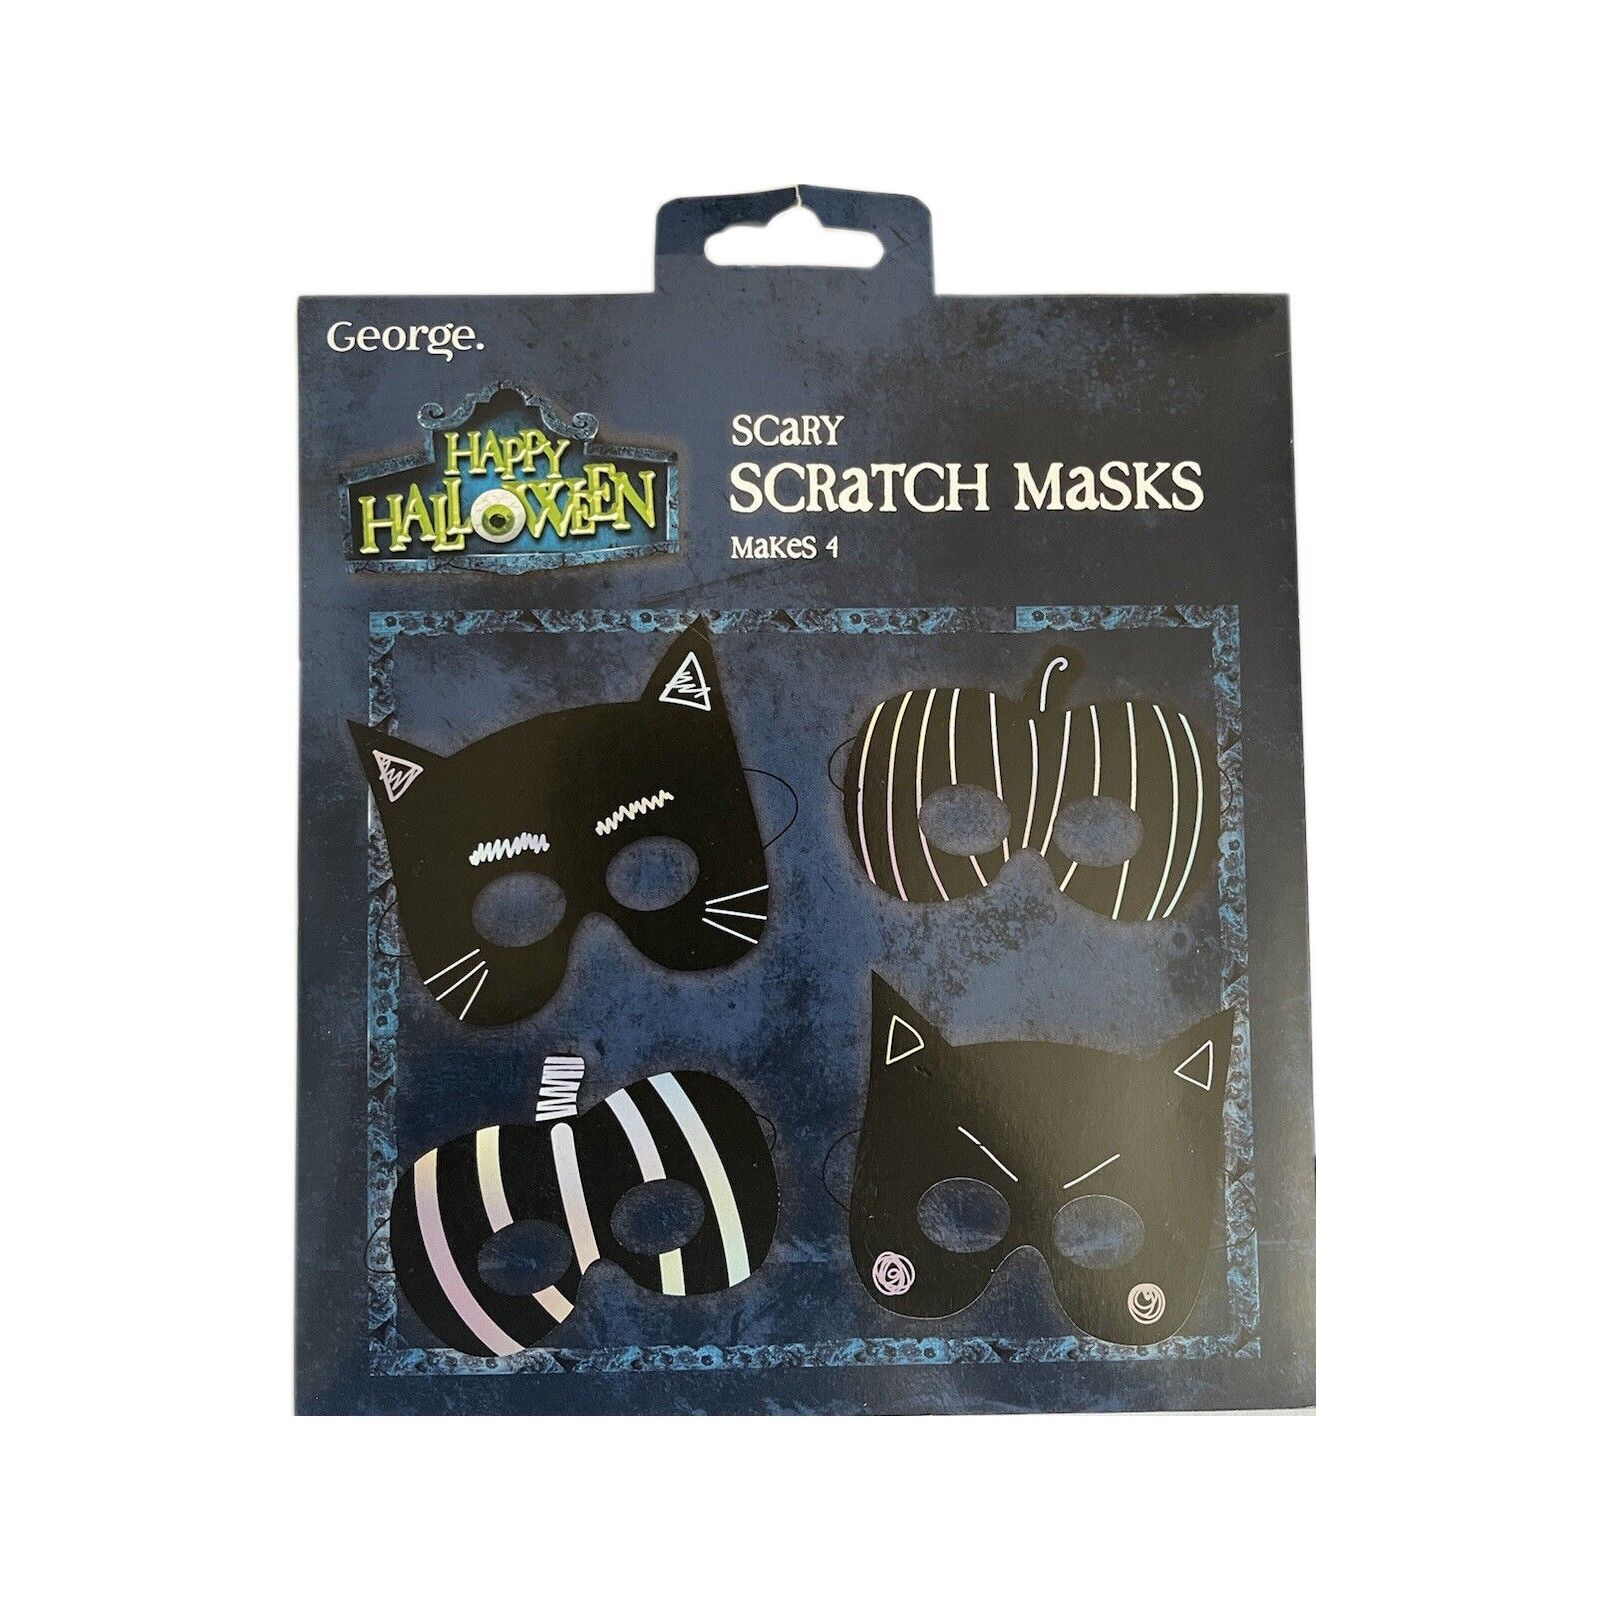 George Happy Halloween Scary Scratch Masks Makes 4 RRP £3.25 CLEARANCE XL £2.50